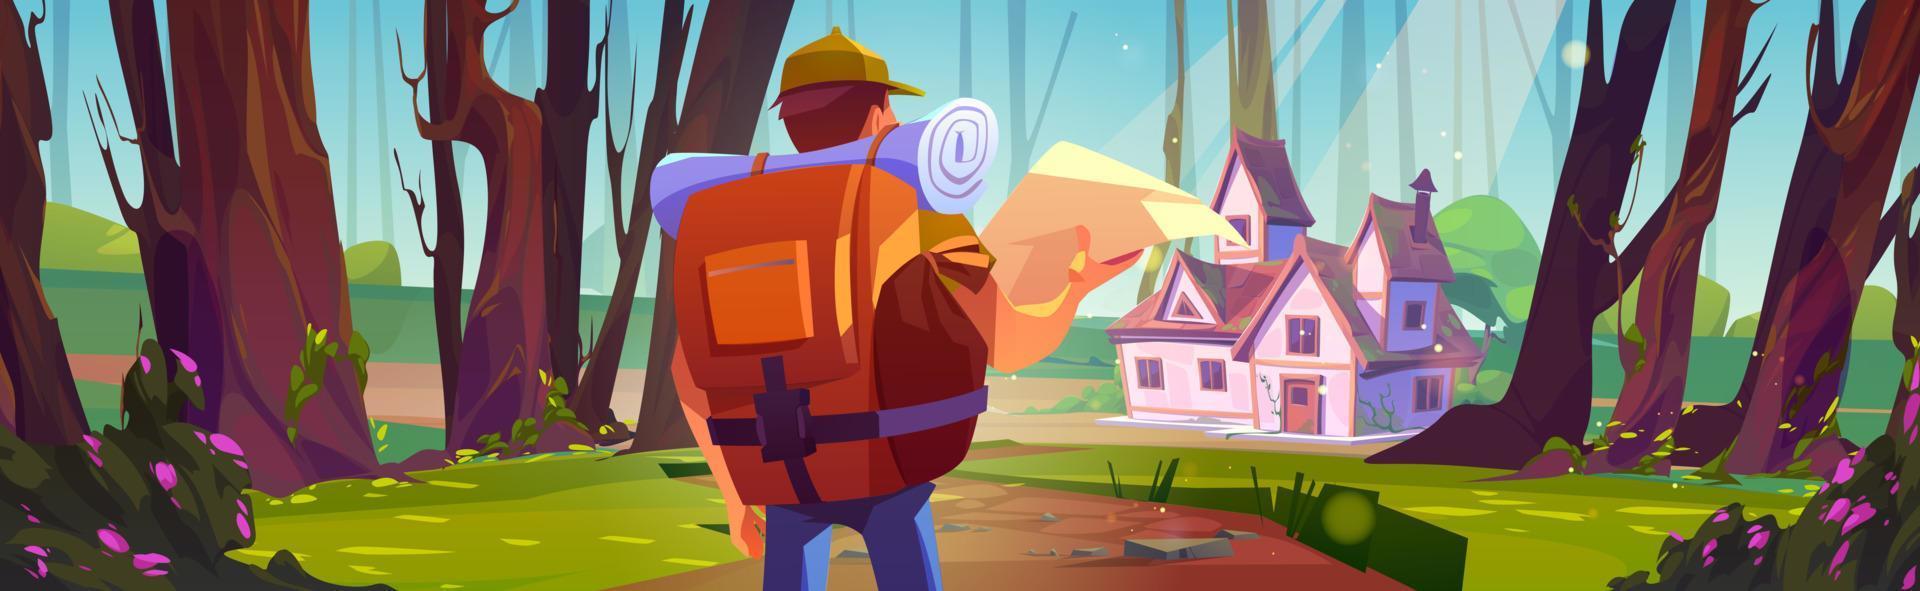 Hiker with backpack and map in forest with house vector